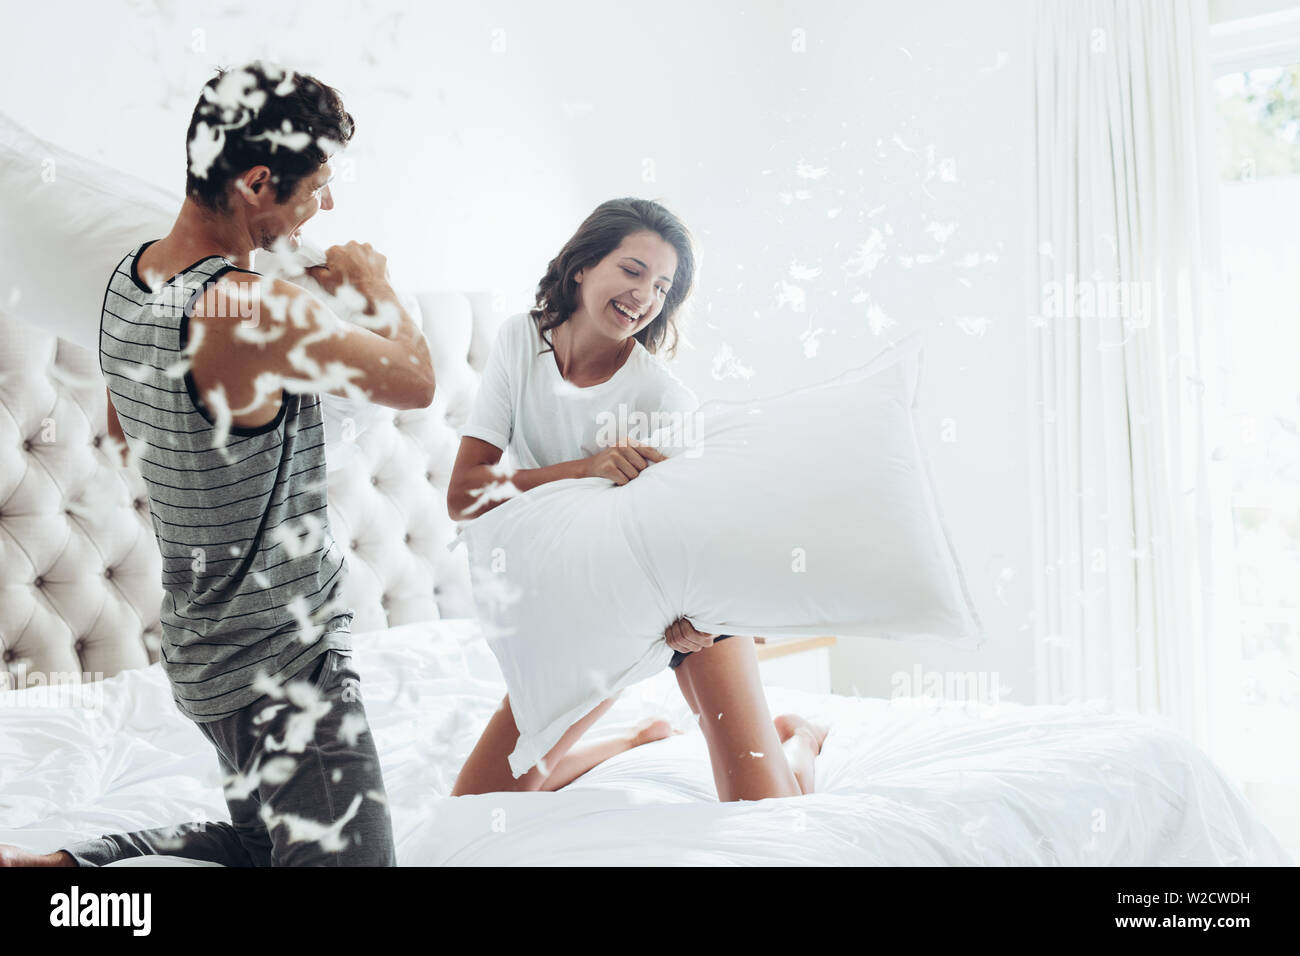 Young couple having a pillow fight in their bedroom. Man and woman fighting with pillows on bed. Stock Photo